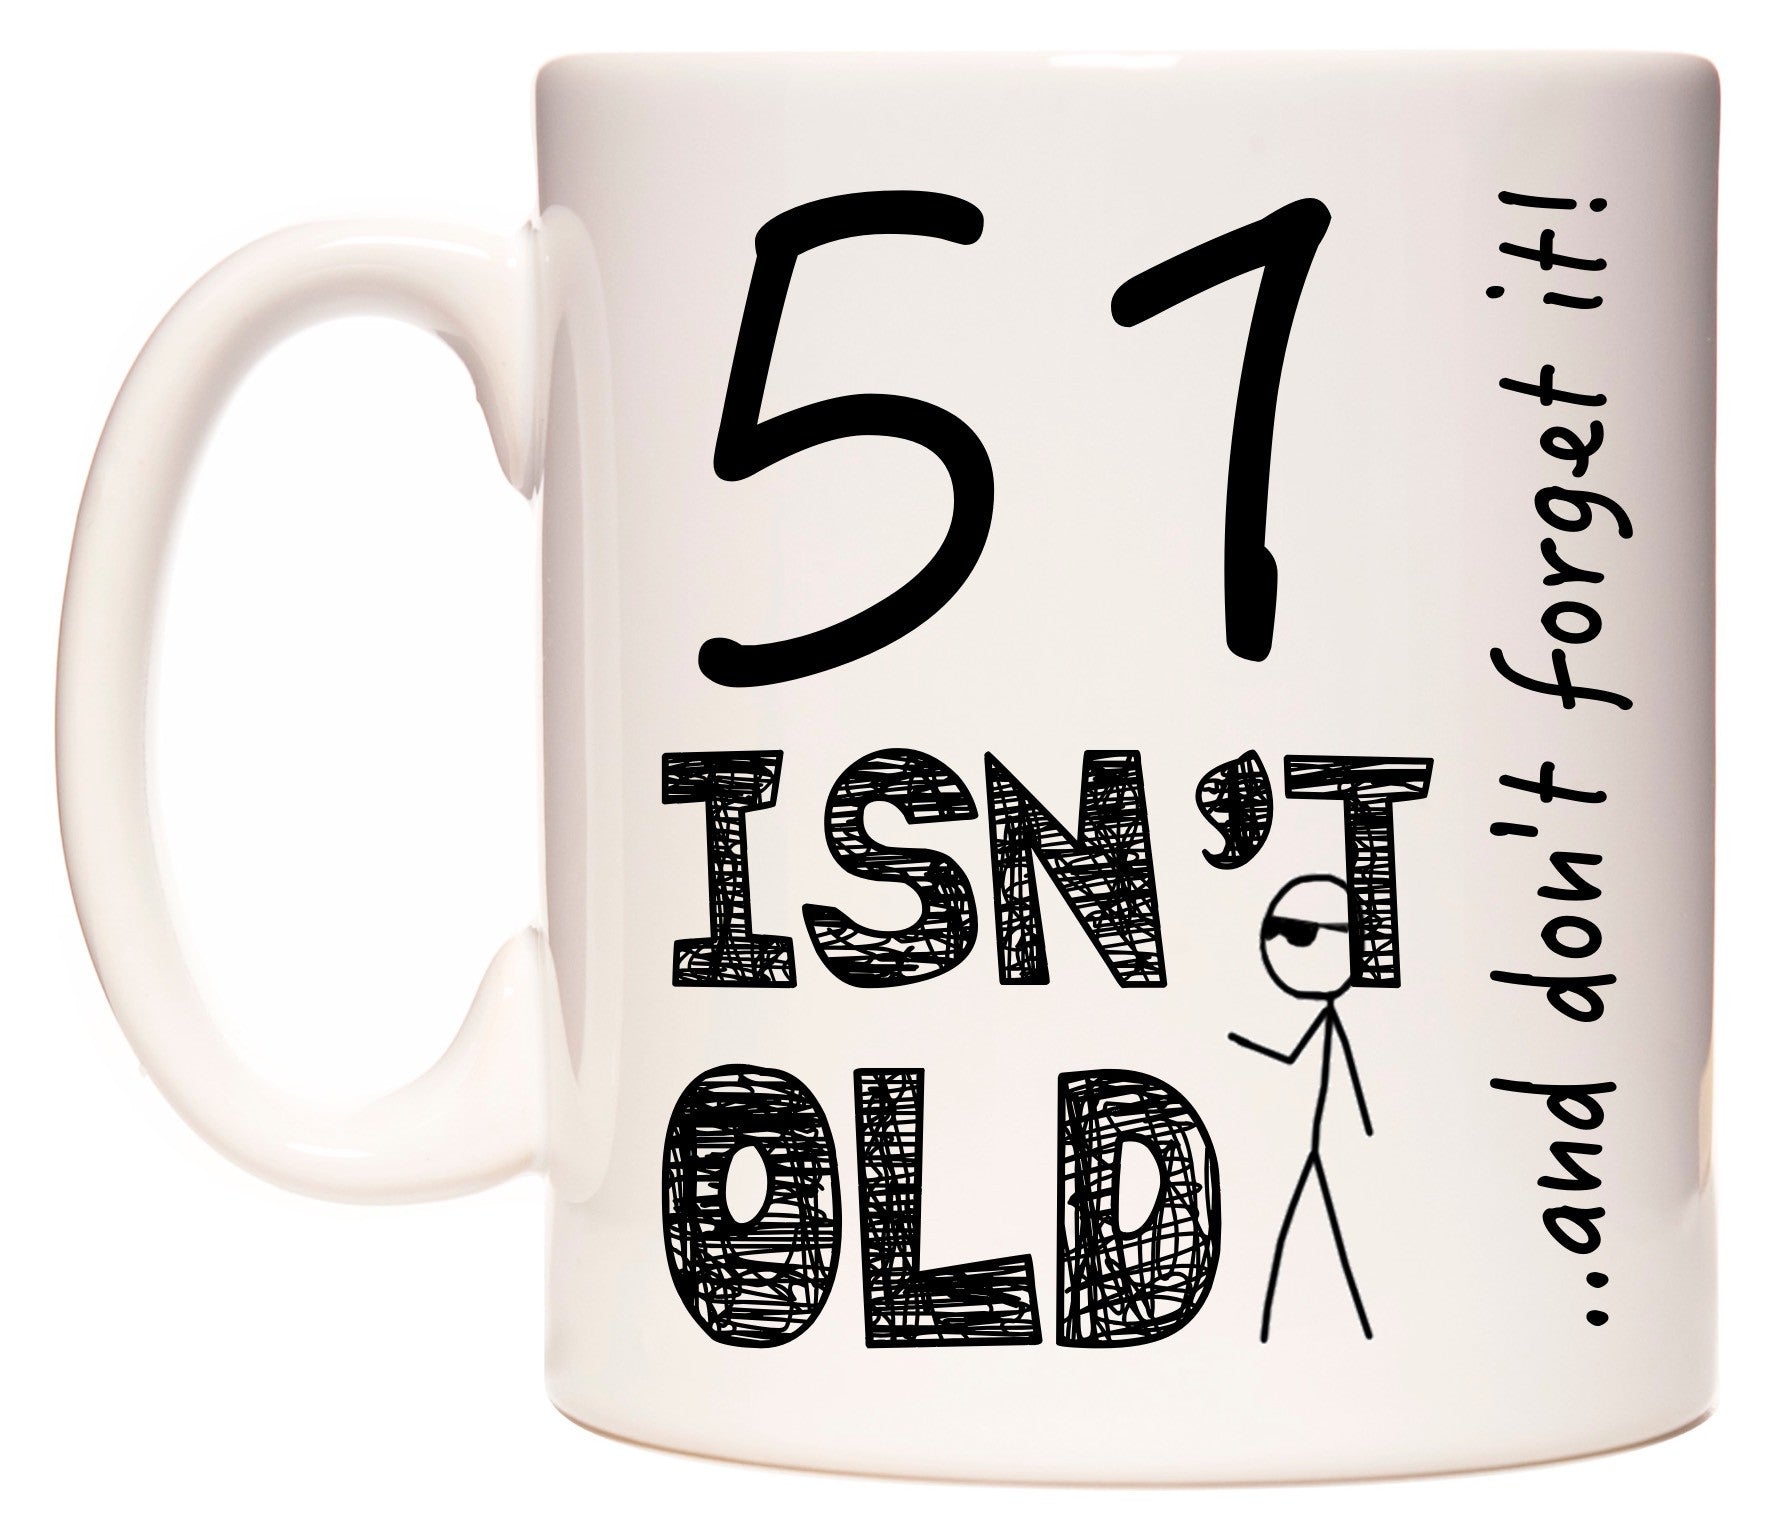 This mug features 51 Isn't Old